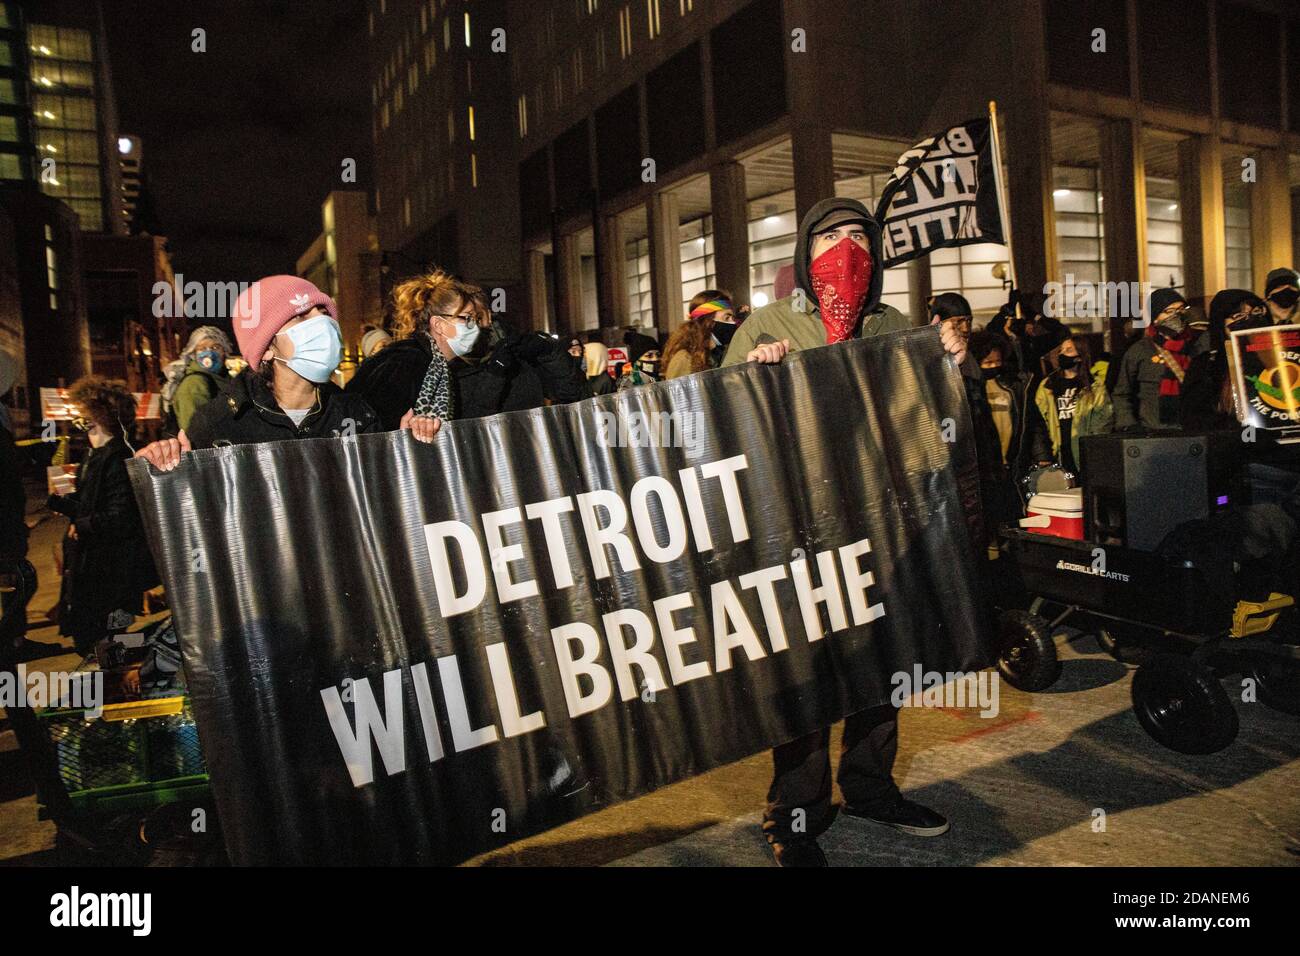 Protesters hold 'Detroit Will Breathe' banner during the march.Detroit Will Breathe, an activist group against police brutality and for Black Lives, organized a 'Chief Craig Resign' night march in downtown Detroit. This particular protest focused on Police Chief James Craig's treatment of right wing protesters who entered Detroit to stop the counting of votes in the TCF Center on the day after the election. Detroit Will Breathe claims their peaceful protesters have been sent to the hospital by the Detroit Police, while the right wing protesters were welcomed into Detroit. Kevin Saunderson, one Stock Photo